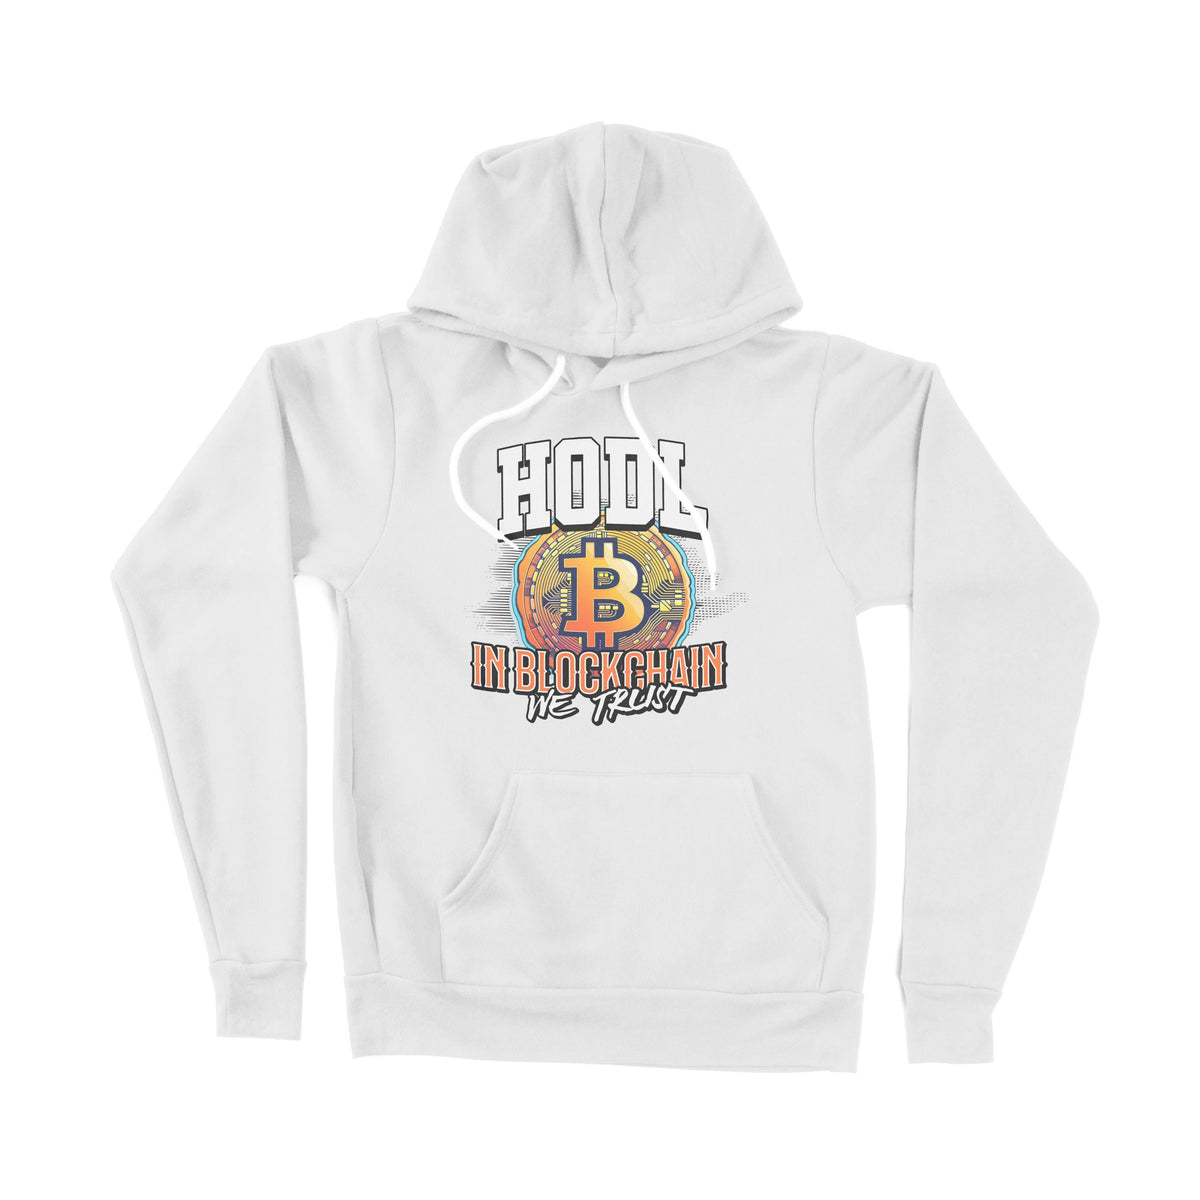 Hodl In Blockchain We Trust Unisex Adult Pullover Hoodie Chroma Clothing